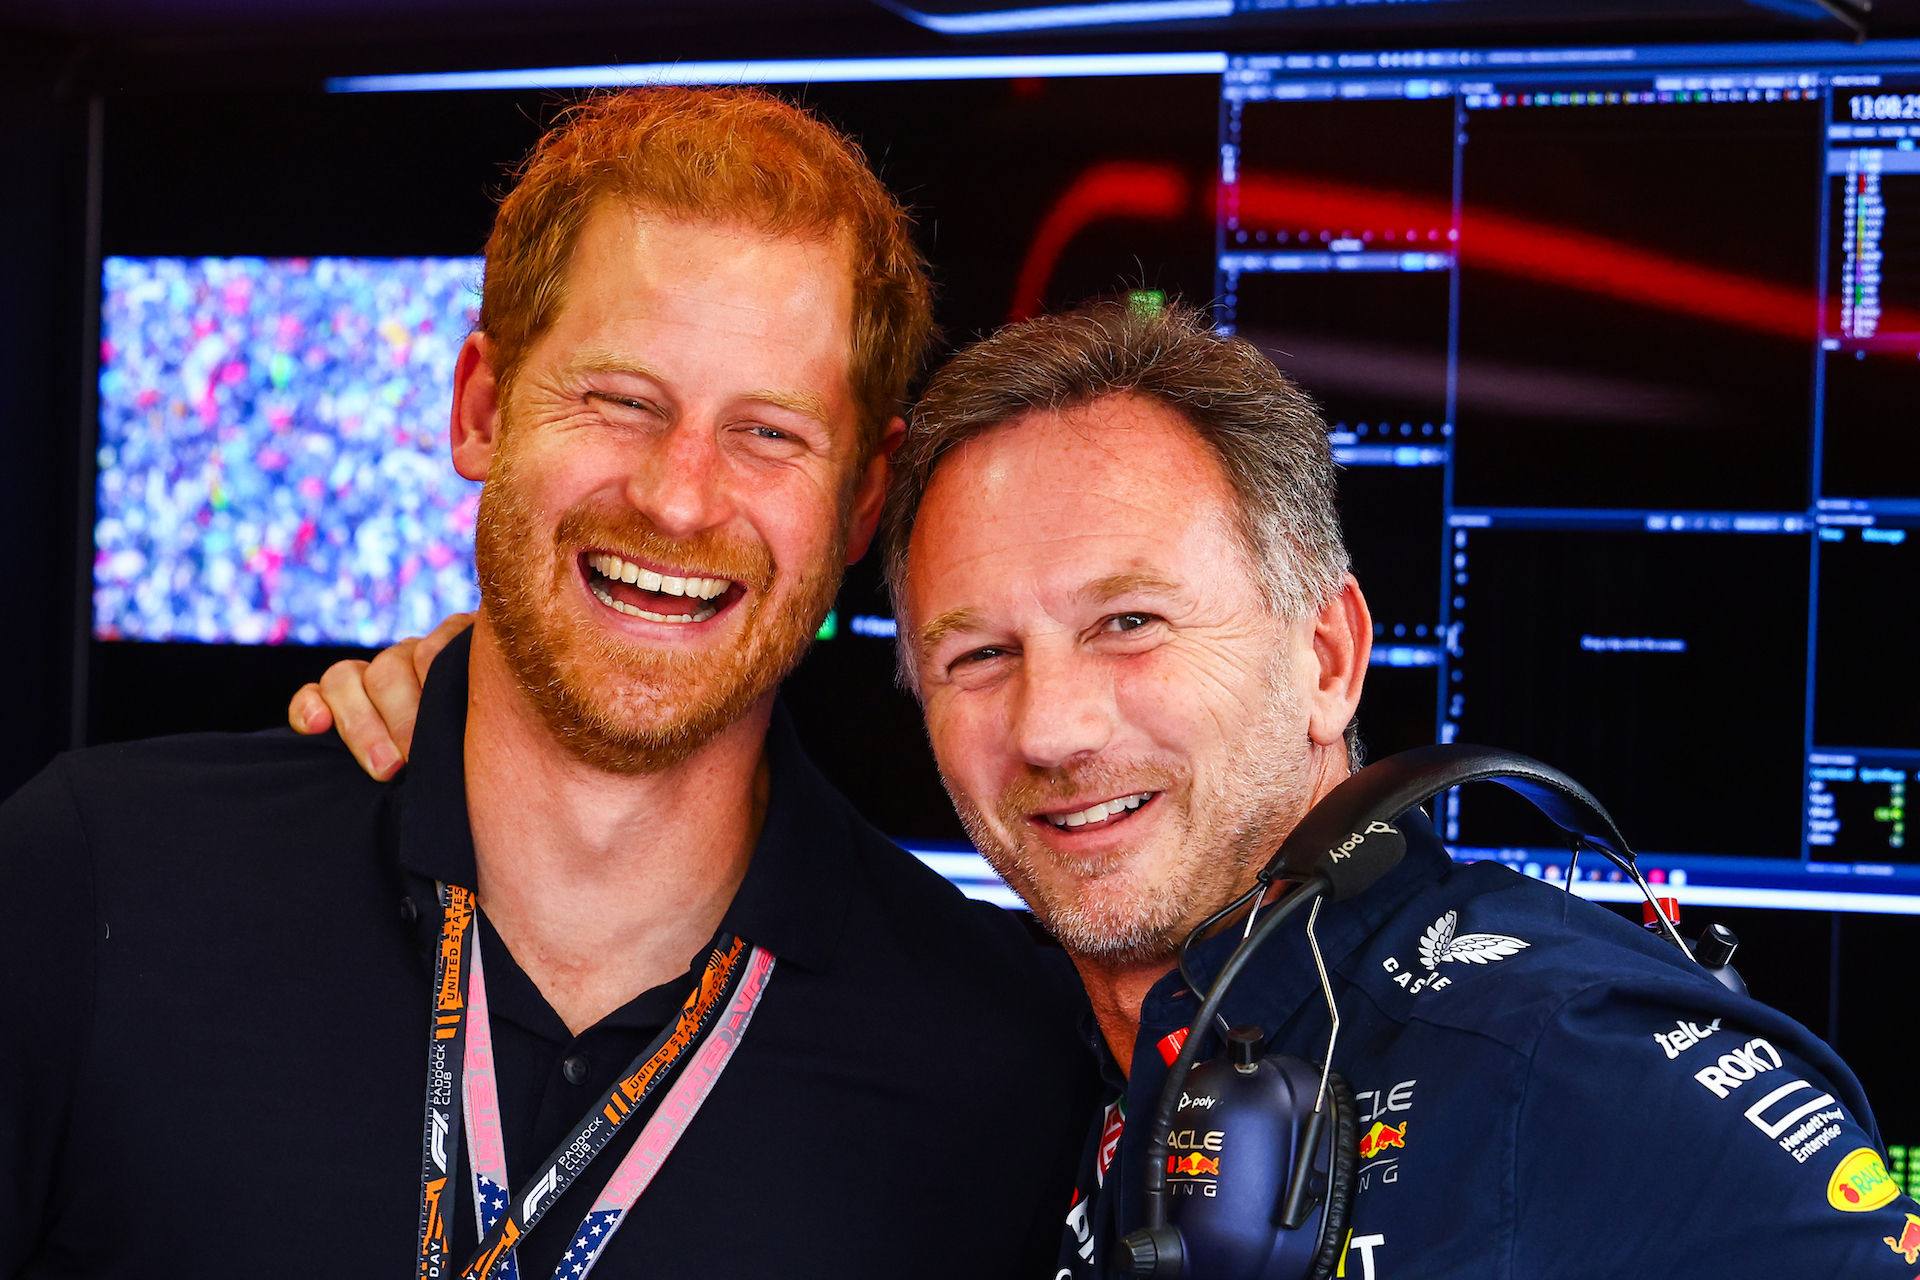 Prince Harry shares a laugh with Red Bull team principal Christian Horner at the Austin GP. Both are looking at the camera and Horner has his hand on Harry's opposite shoulder.